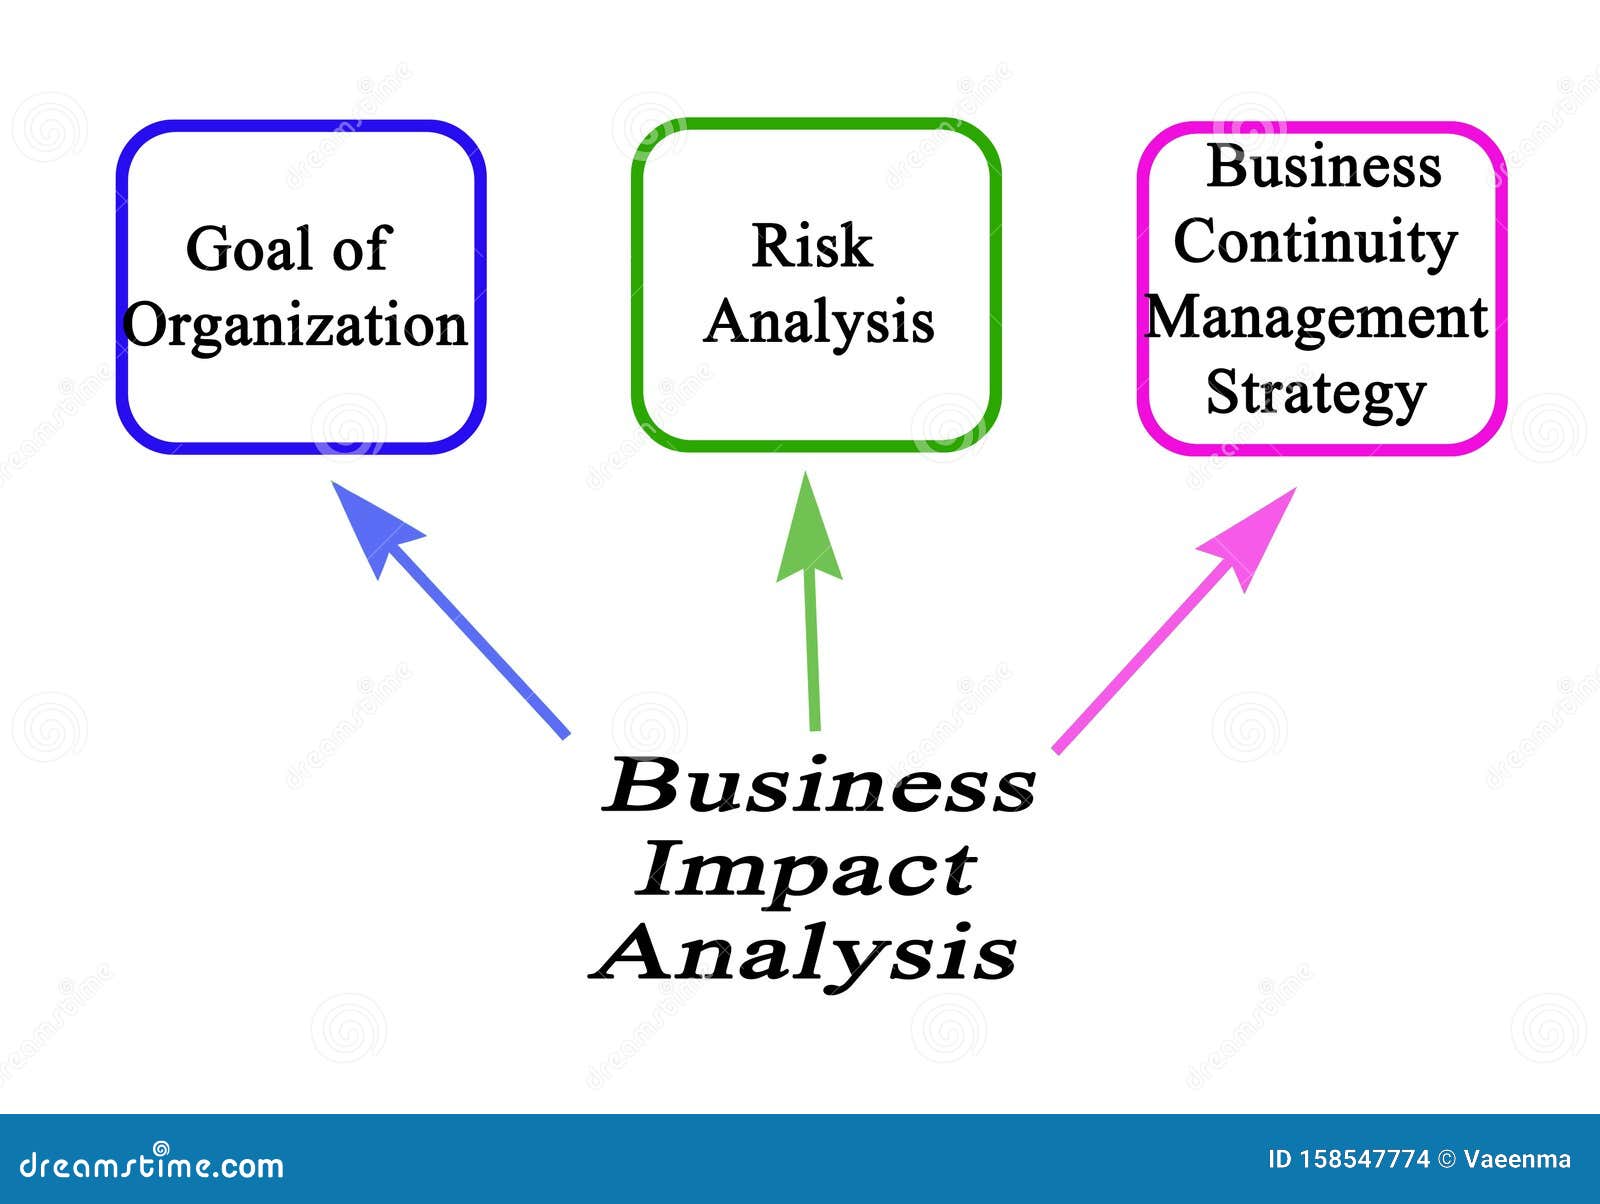 10 Awesome Tips About business analysis From Unlikely Websites